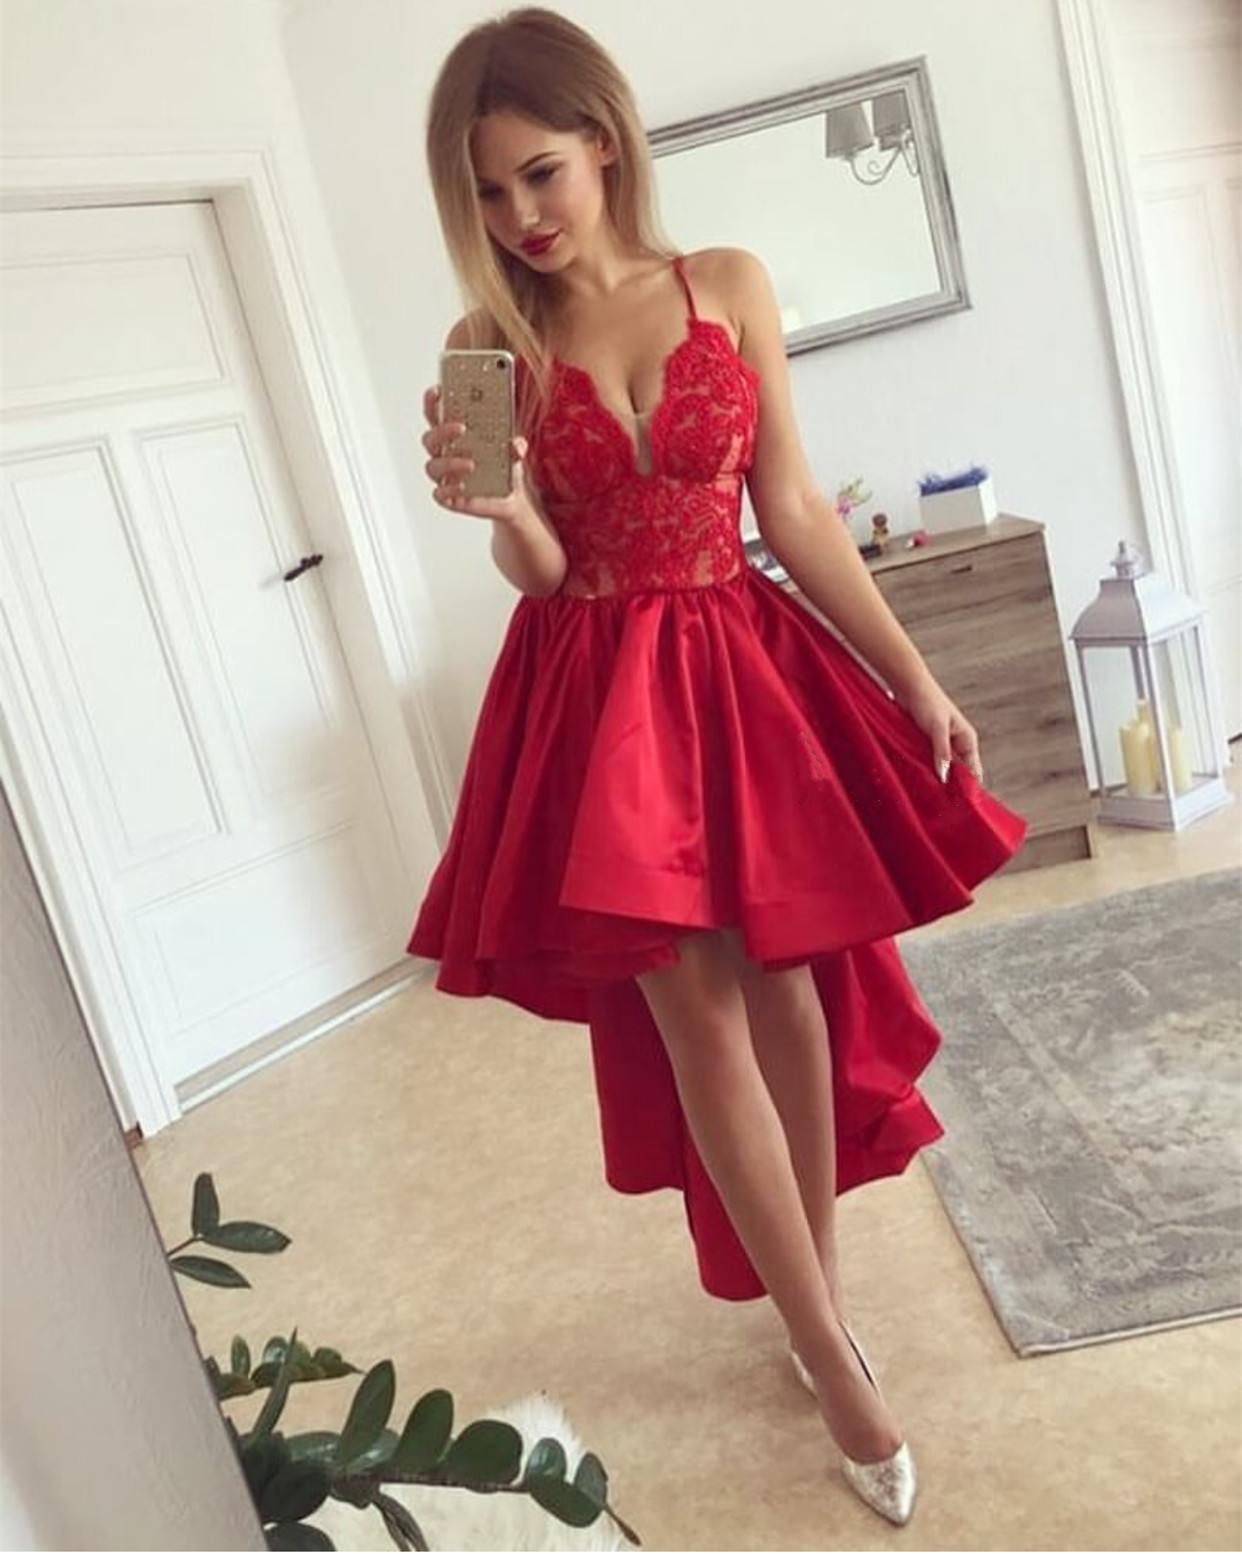 Sexy Red Plunging V Neck High Low Prom Dress Lace Short Homecoming Dresses With Spaghetti Straps Satin Short Party Dresses